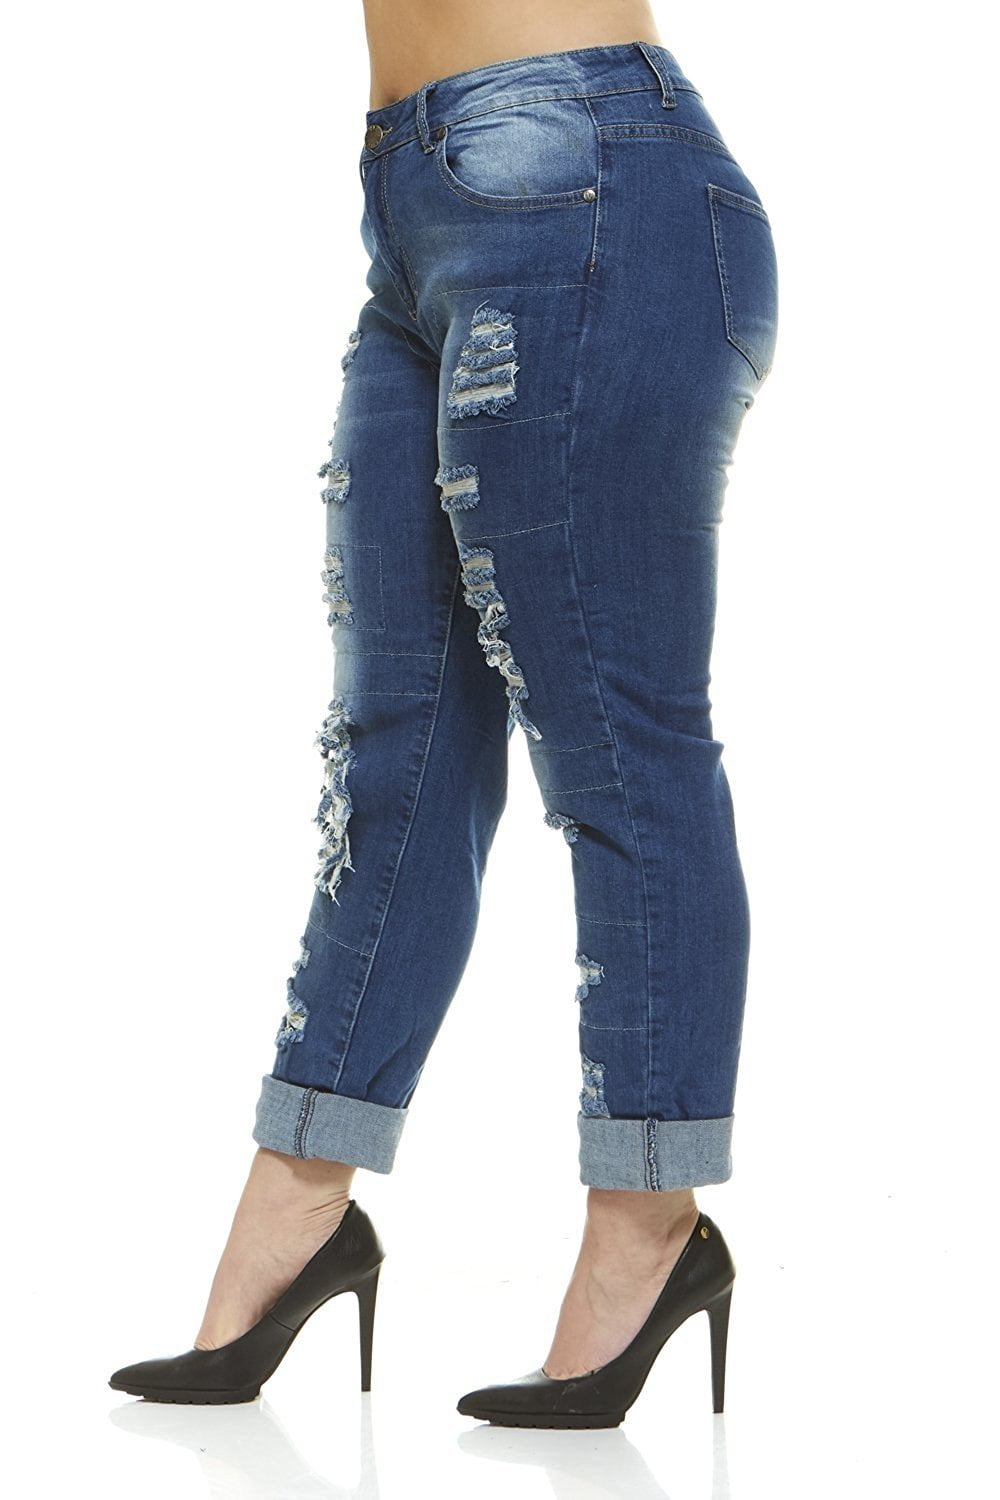 VIP Jeans - V.I.P.JEANS Distressed Patched and Repaired Skinny Stretch ...